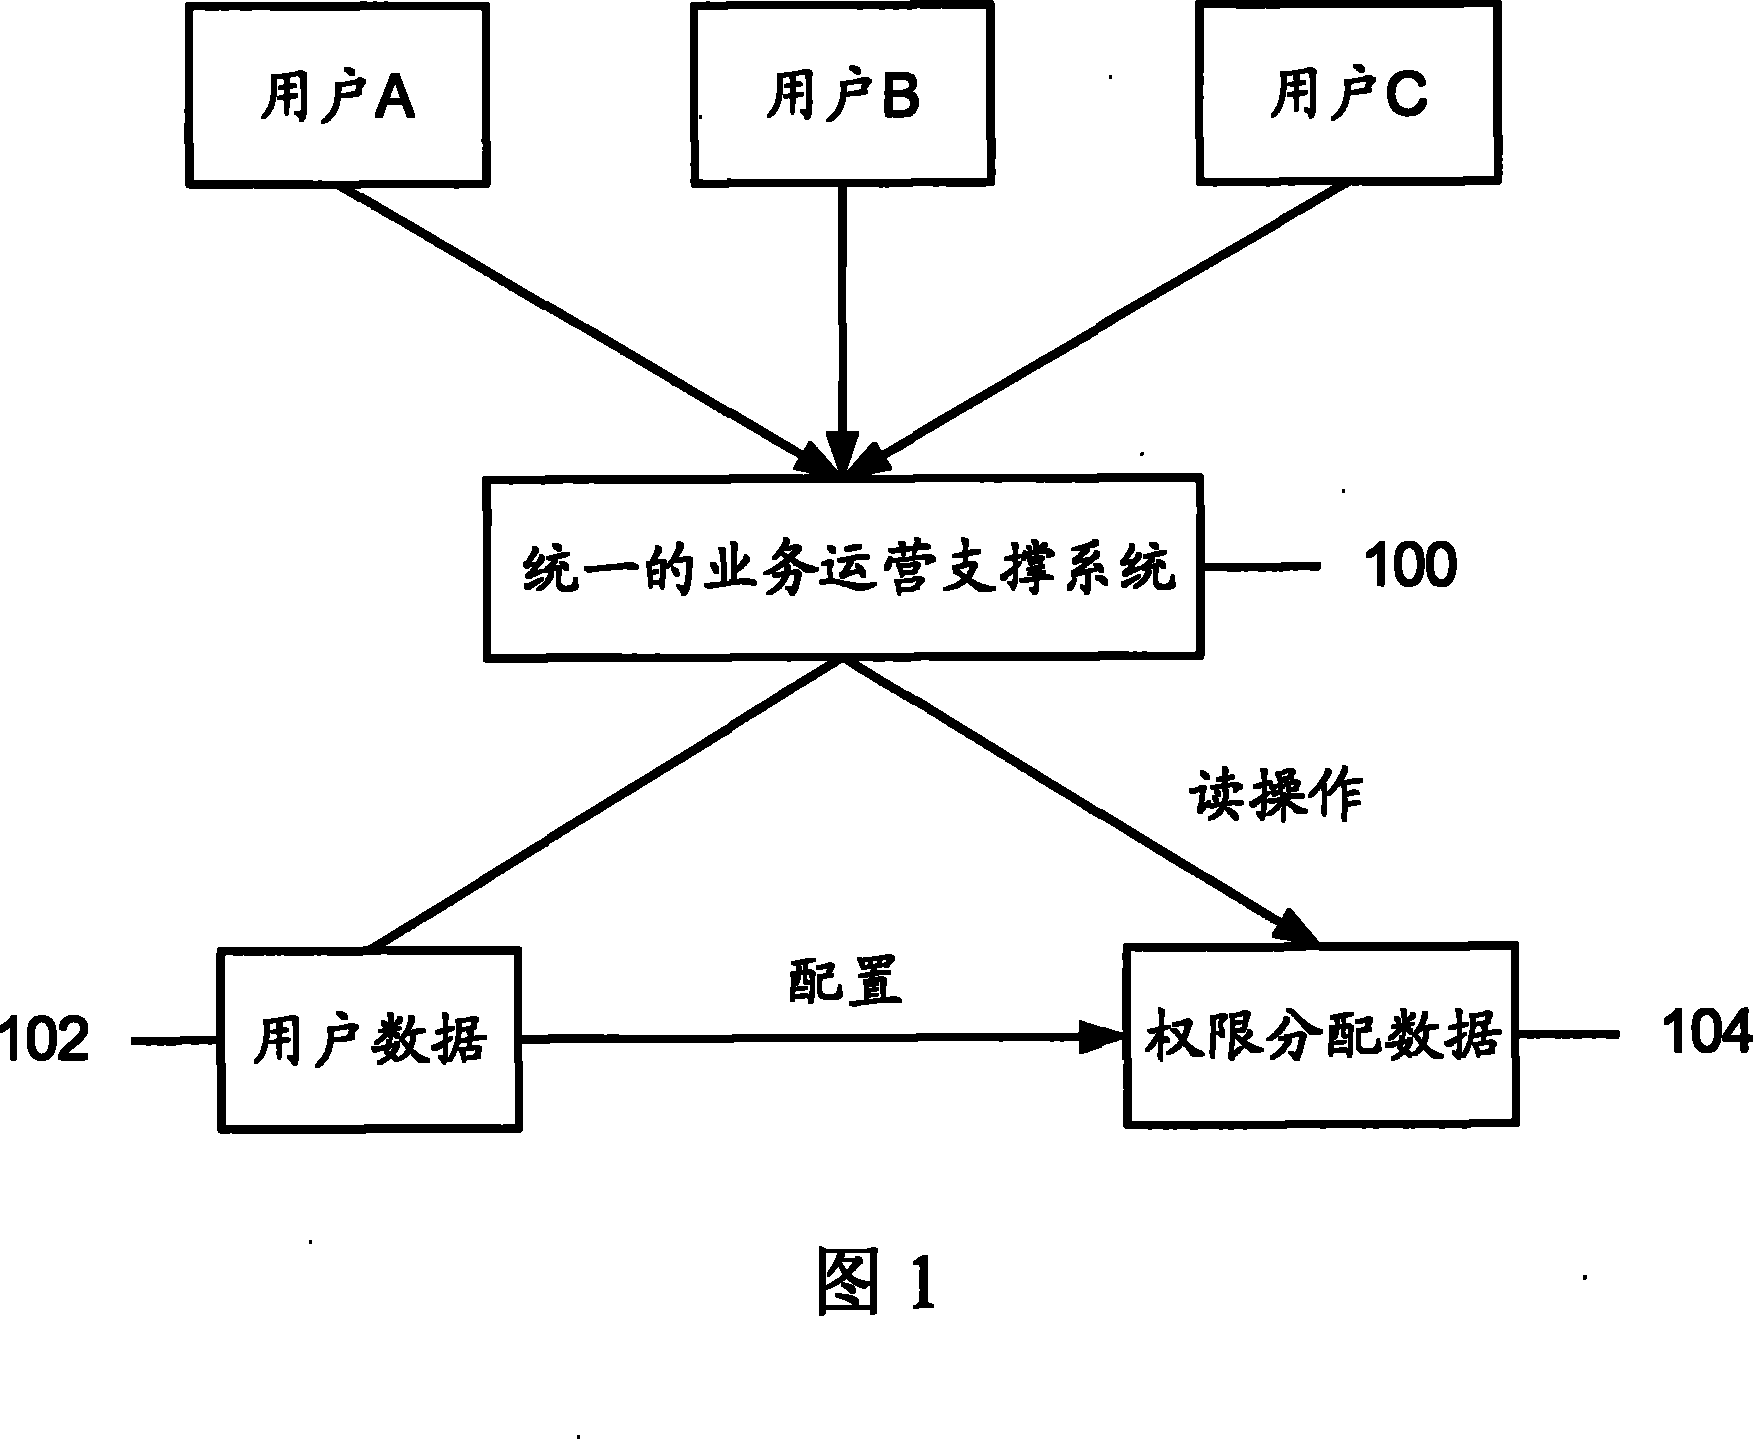 Distributed business operation support system and method for implementing distributed business